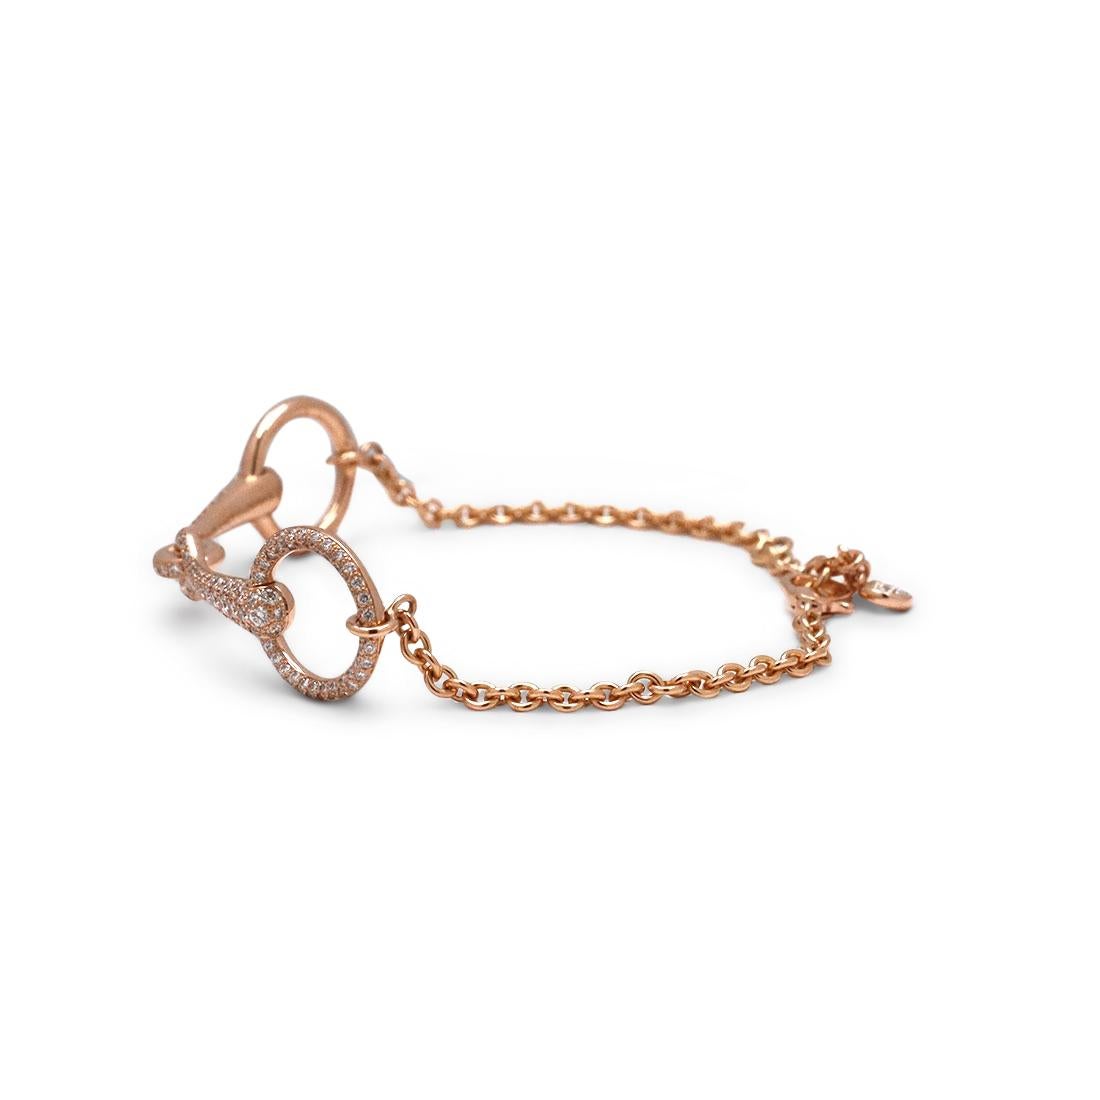 Authentic Hermès ‘Filet d’Or’ bracelet crafted in 18 karat rose gold and pave set with approximately .96 carats of high-quality diamonds. Featuring a whimsical equestrian theme, the bracelet measures 6.2 inches in length. Signed Hermès, ST, Made in